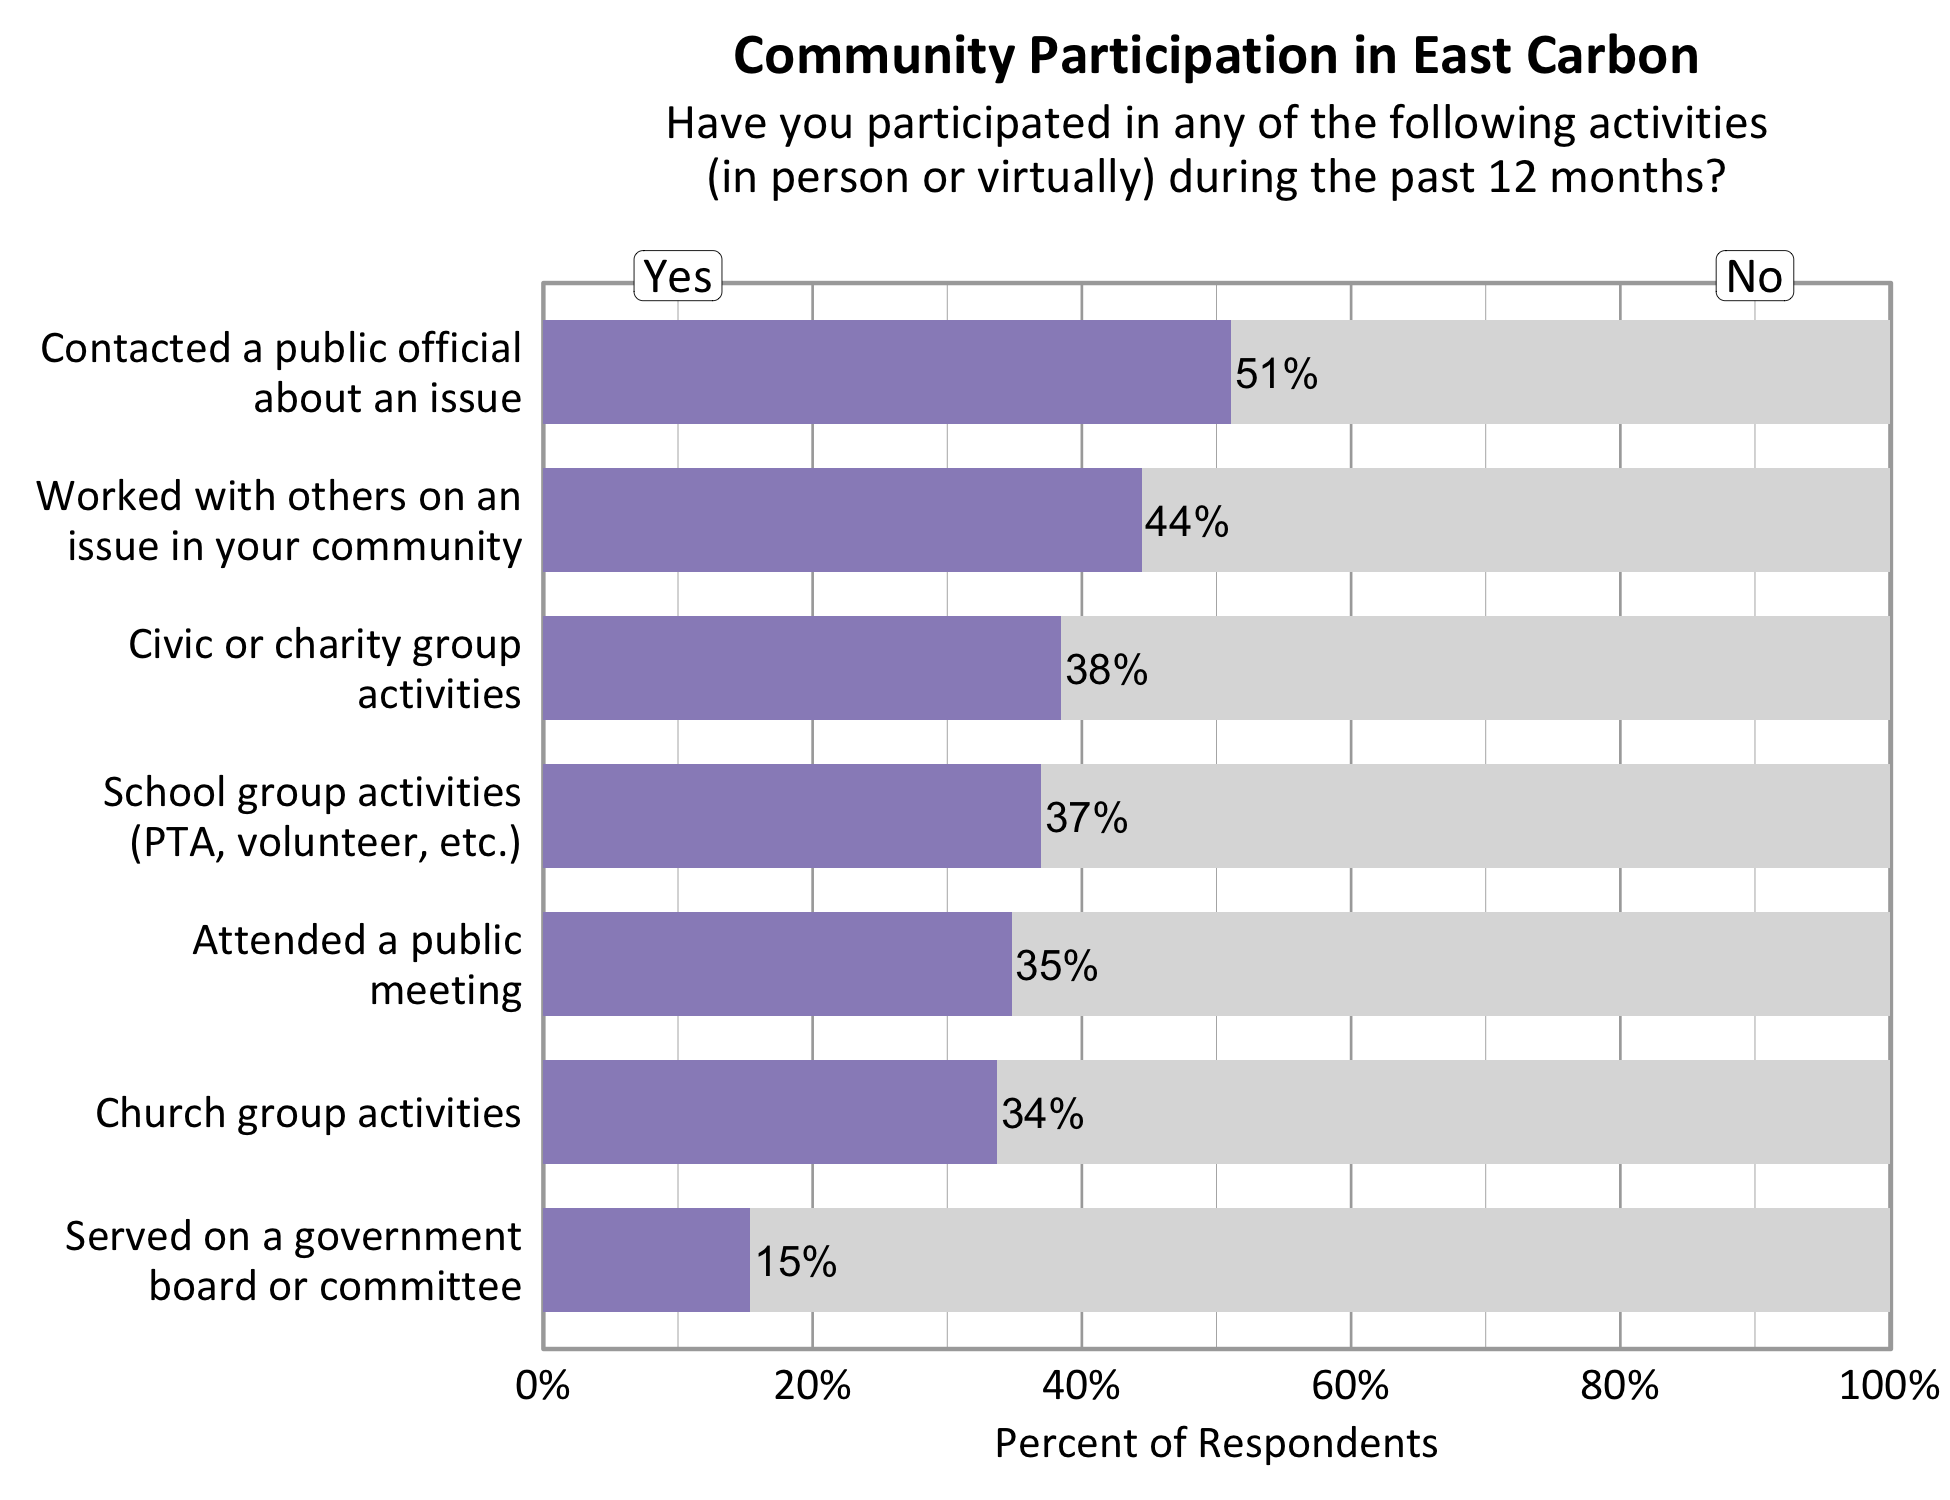 Type: Bar Graph Title: Community Participation in East Carbon. Subtitle: Have you participated in any of the following activities (in person or virtually) during the past 12 months? Data - 34% of respondents indicated yes to church group activities. 44% of respondents indicated yes to working with others on an issue in your community. 51% of respondents indicated yes to contacting a public official about an issue. 38% of respondents indicated yes to a civic or charity group activity. 37% of respondents indicated yes to participating in School group activities. 35% of respondents indicated yes to attending a public meeting. 15% of respondents indicated yes to serving on a government board or committee. 